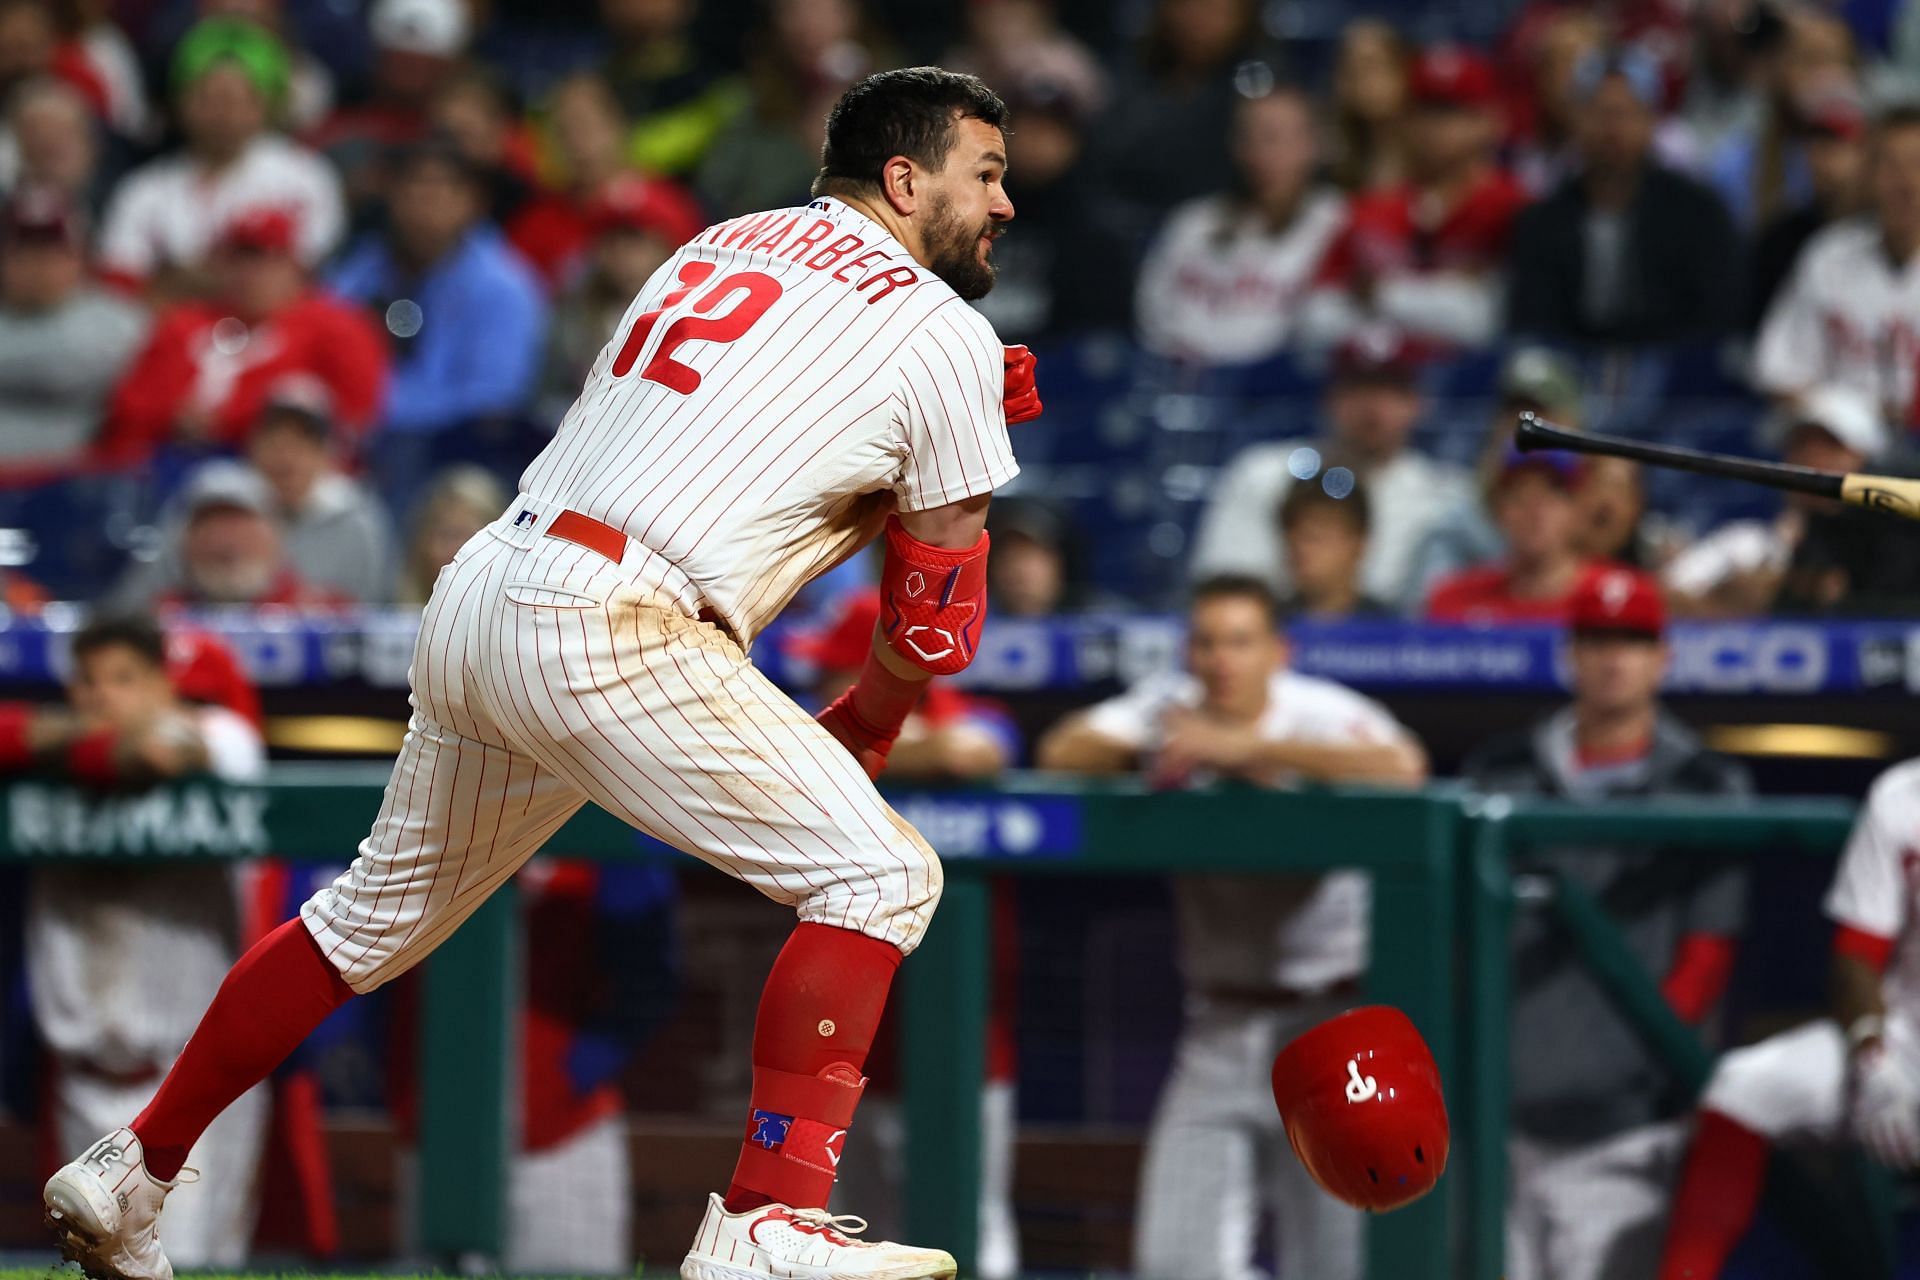 Philadelphia Phillies slugger Kyle Schwarber made his disapproval known after getting called out on a close pitch.